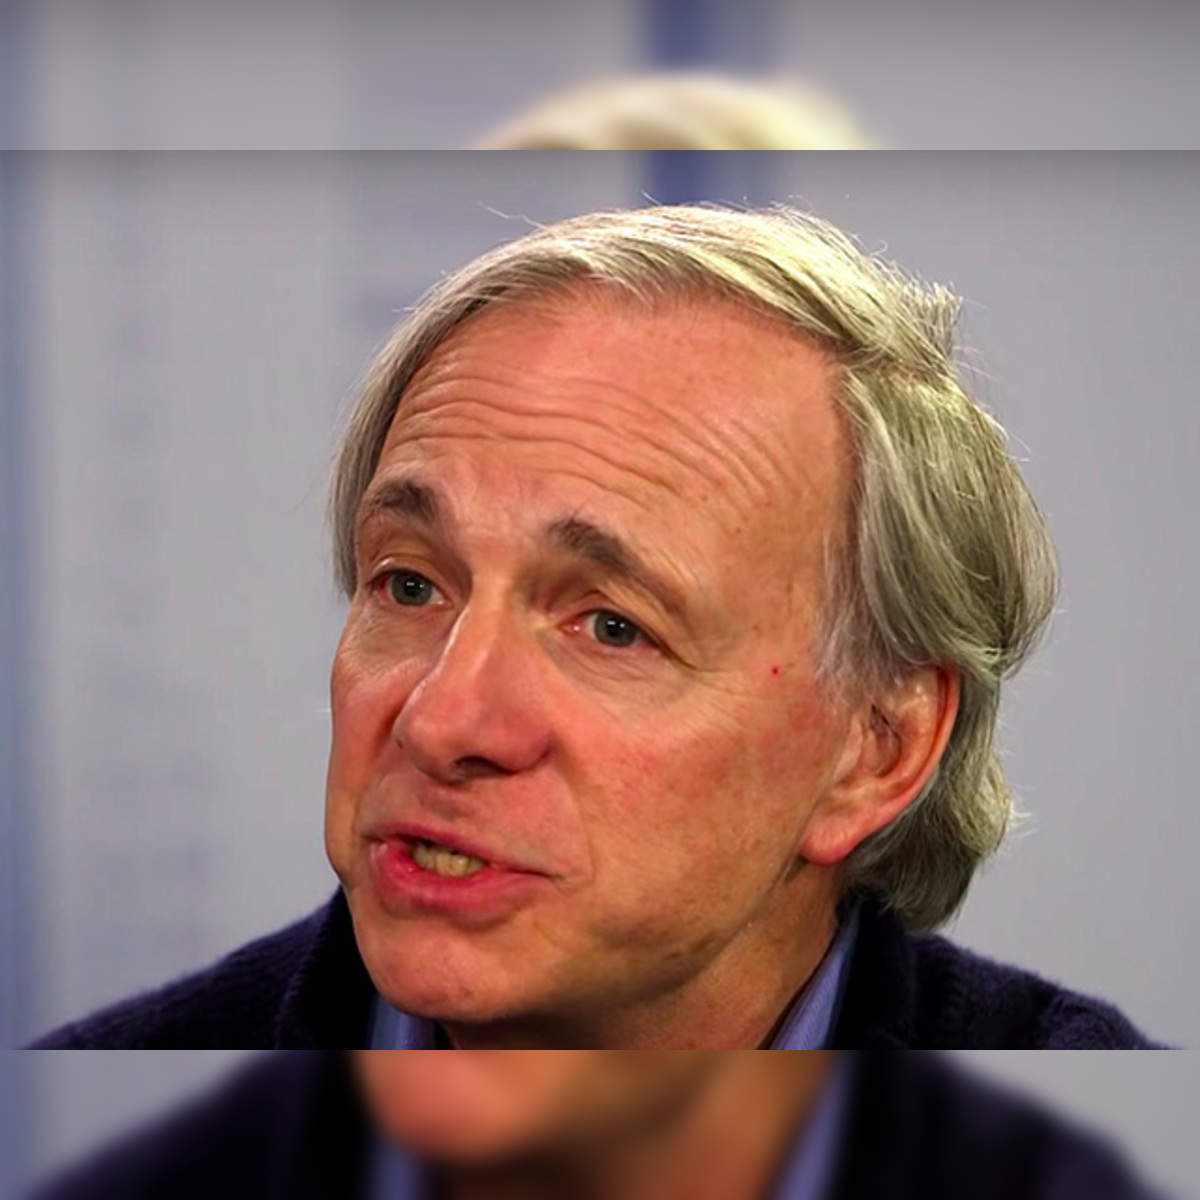 Ray Dalio: Principles with Ray Dalio: how to learn from mistakes - The  Economic Times